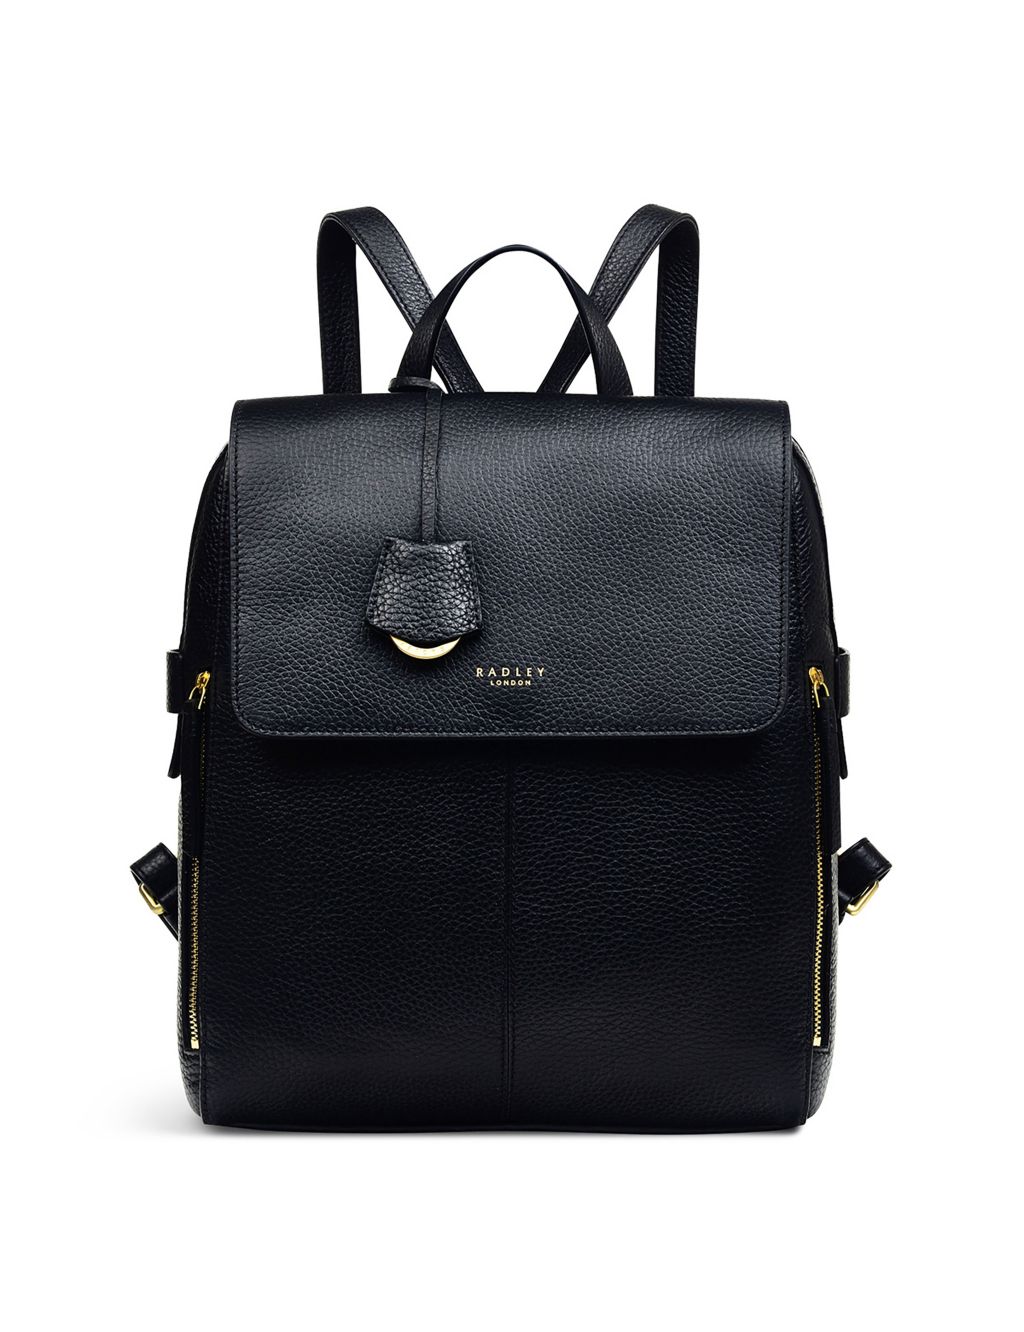 Lorne Close Leather Backpack image 1